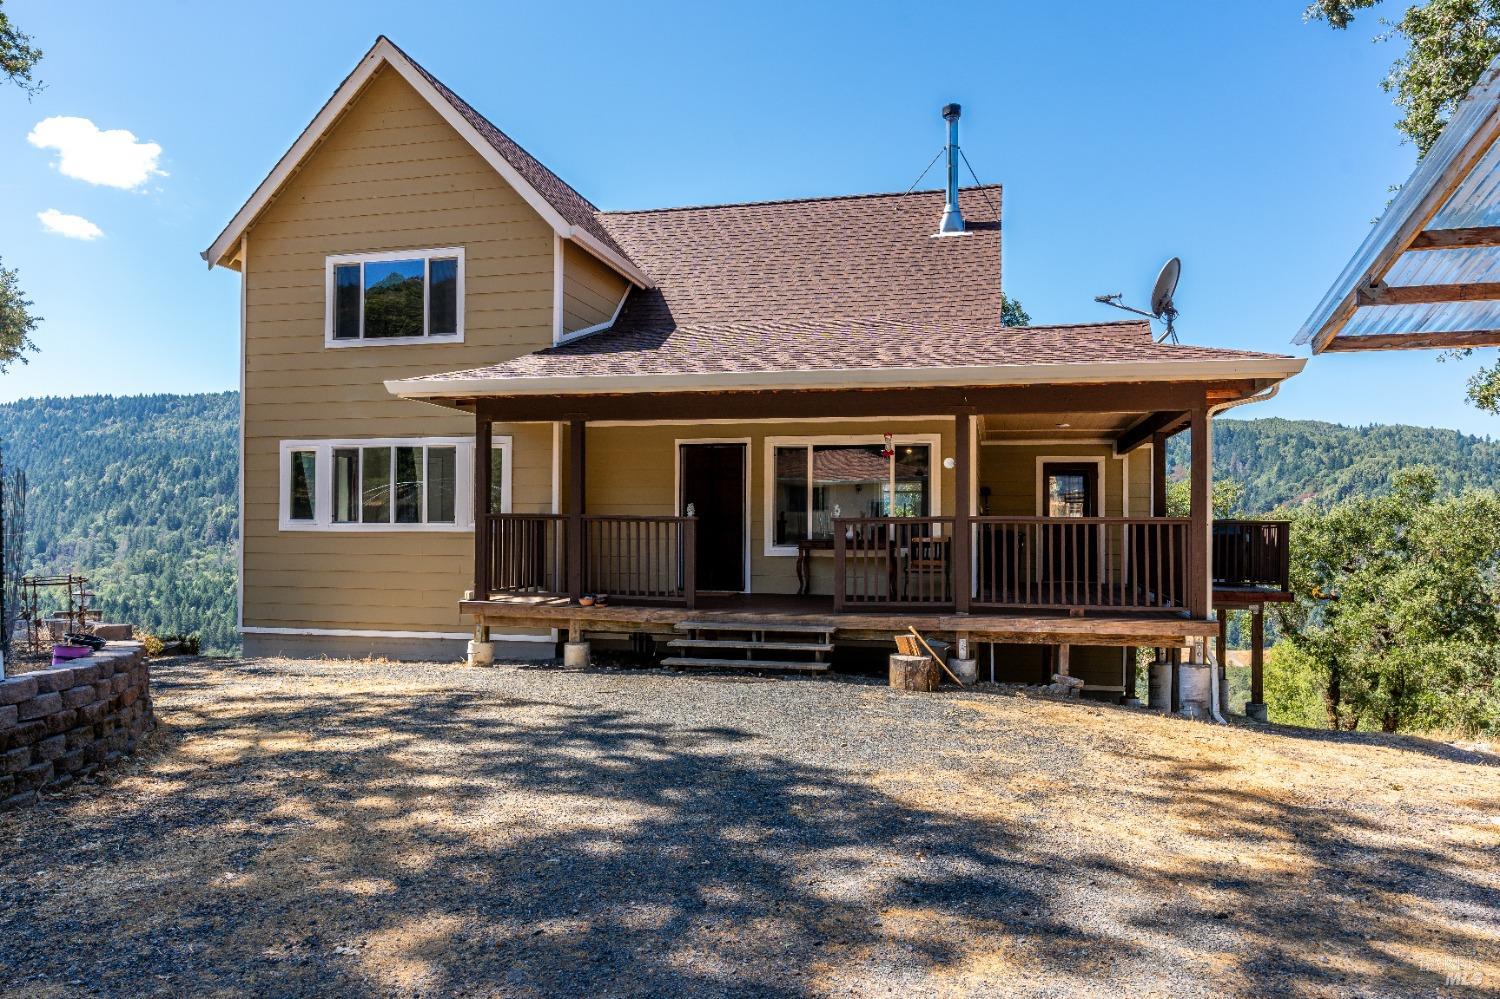 Photo of 14590 Ridgeview Rd in Willits, CA